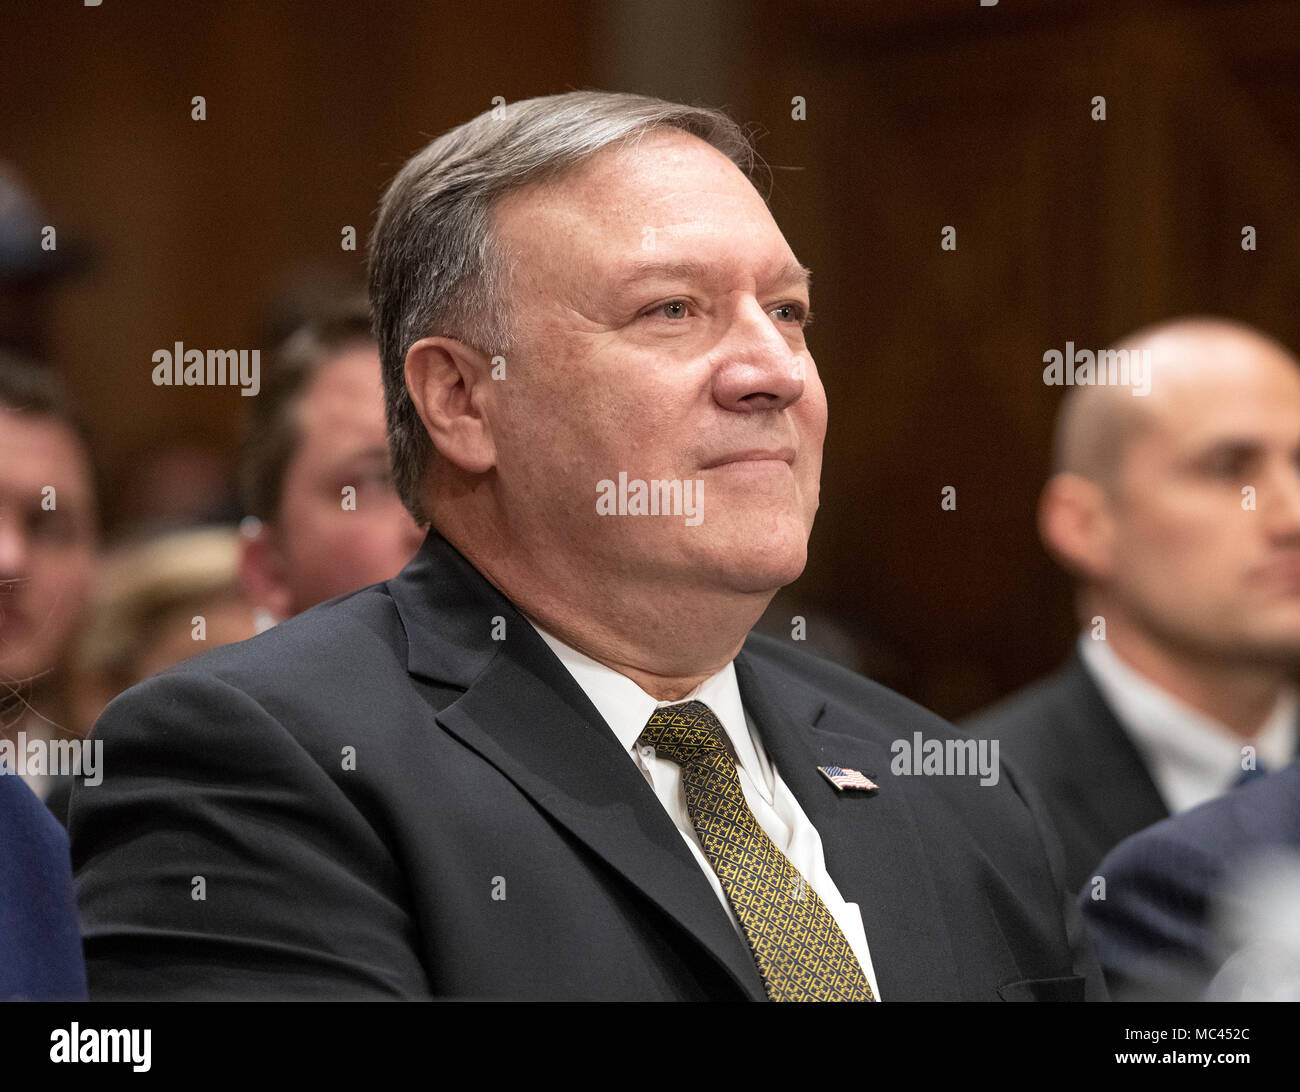 CIA Director Mike Pompeo waits for his opportunity to testify on his nomination to be United States Secretary of State before the US Senate Committee on Foreign Relations on Capitol Hill in Washington, DC on Thursday, April 12, 2018. Credit: Ron Sachs/CNP /MediaPunch Stock Photo